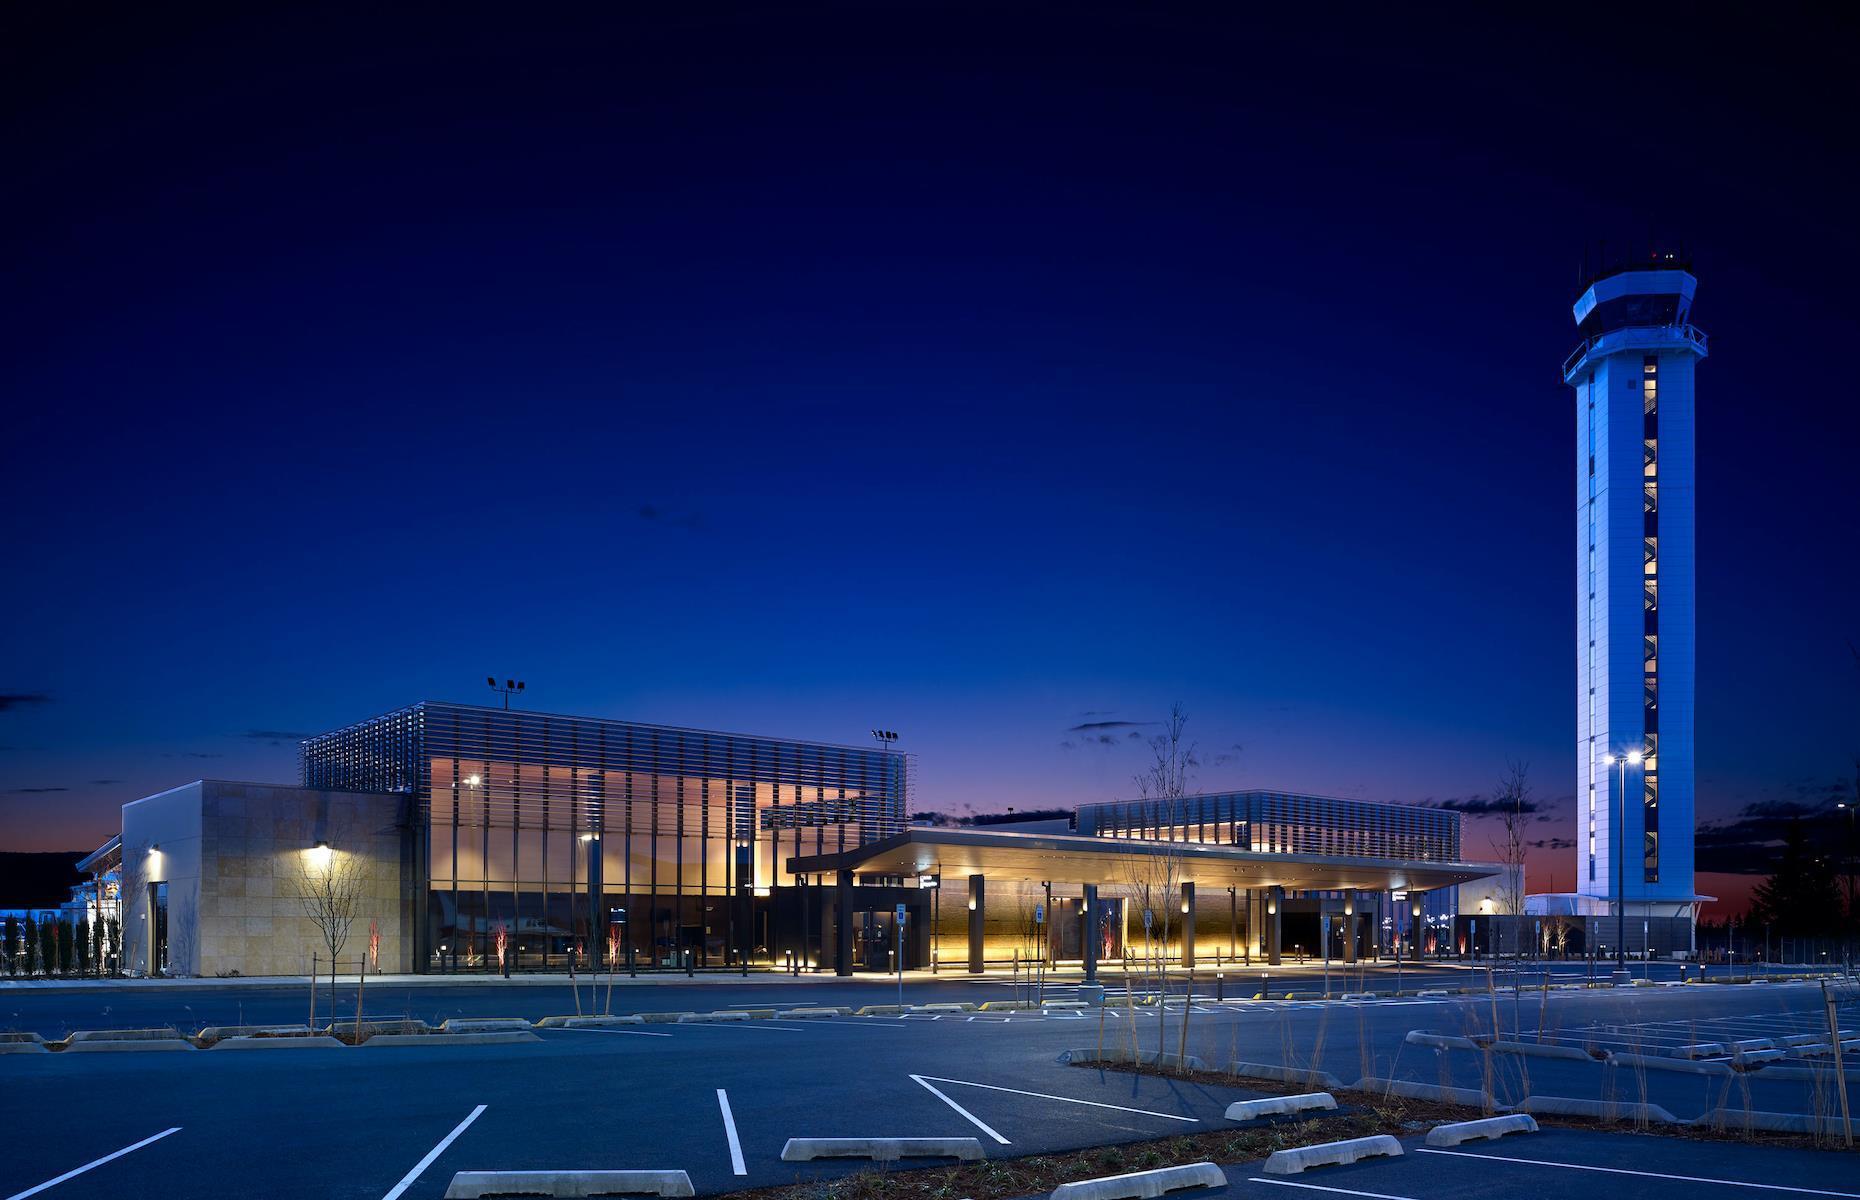 <p>Since reopening for commercial flights in summer 2020, <a href="https://www.painefield.com/">Paine Field</a> has quickly become one of America’s favorite small airports. The compact, two-gate terminal offers just 24 flights a day – in comparison to the 1,010 daily flights handled by nearby Seattle-Tacoma Airport – to cities including Los Angeles, Las Vegas, Boise, Palm Springs, Phoenix and Tucson. Inside, it’s stylishly kitted out with lounge-style seating and floor-to-ceiling windows, while there’s electrical power and high-speed Wi-Fi at every seat.</p>